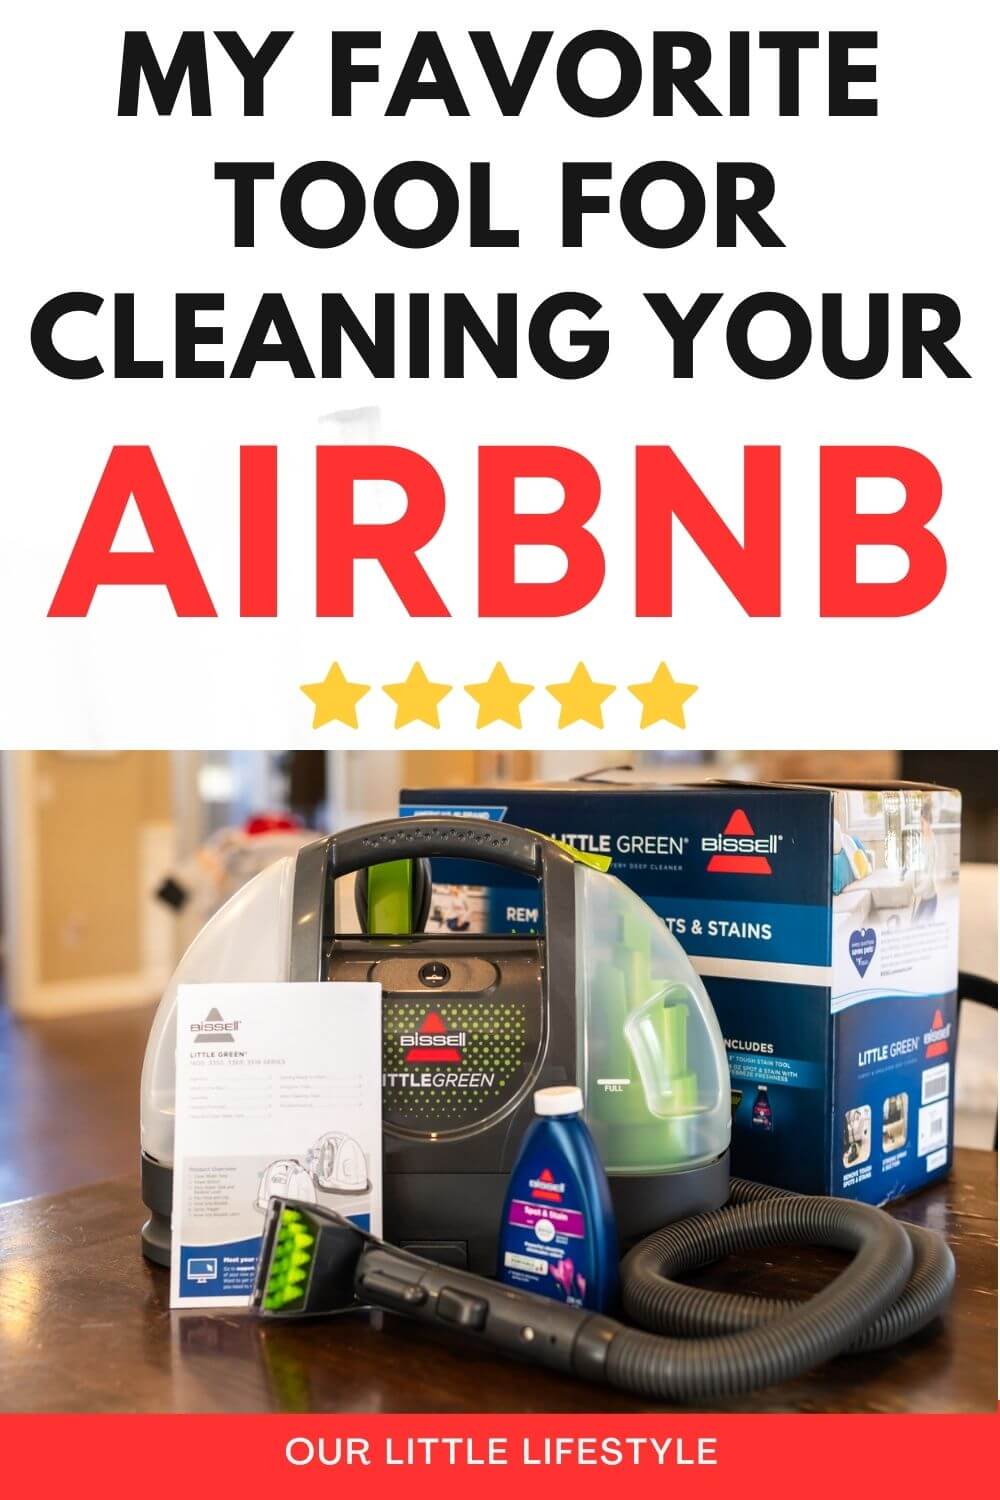 My Favorite Tool For Cleaning Your Airbnb